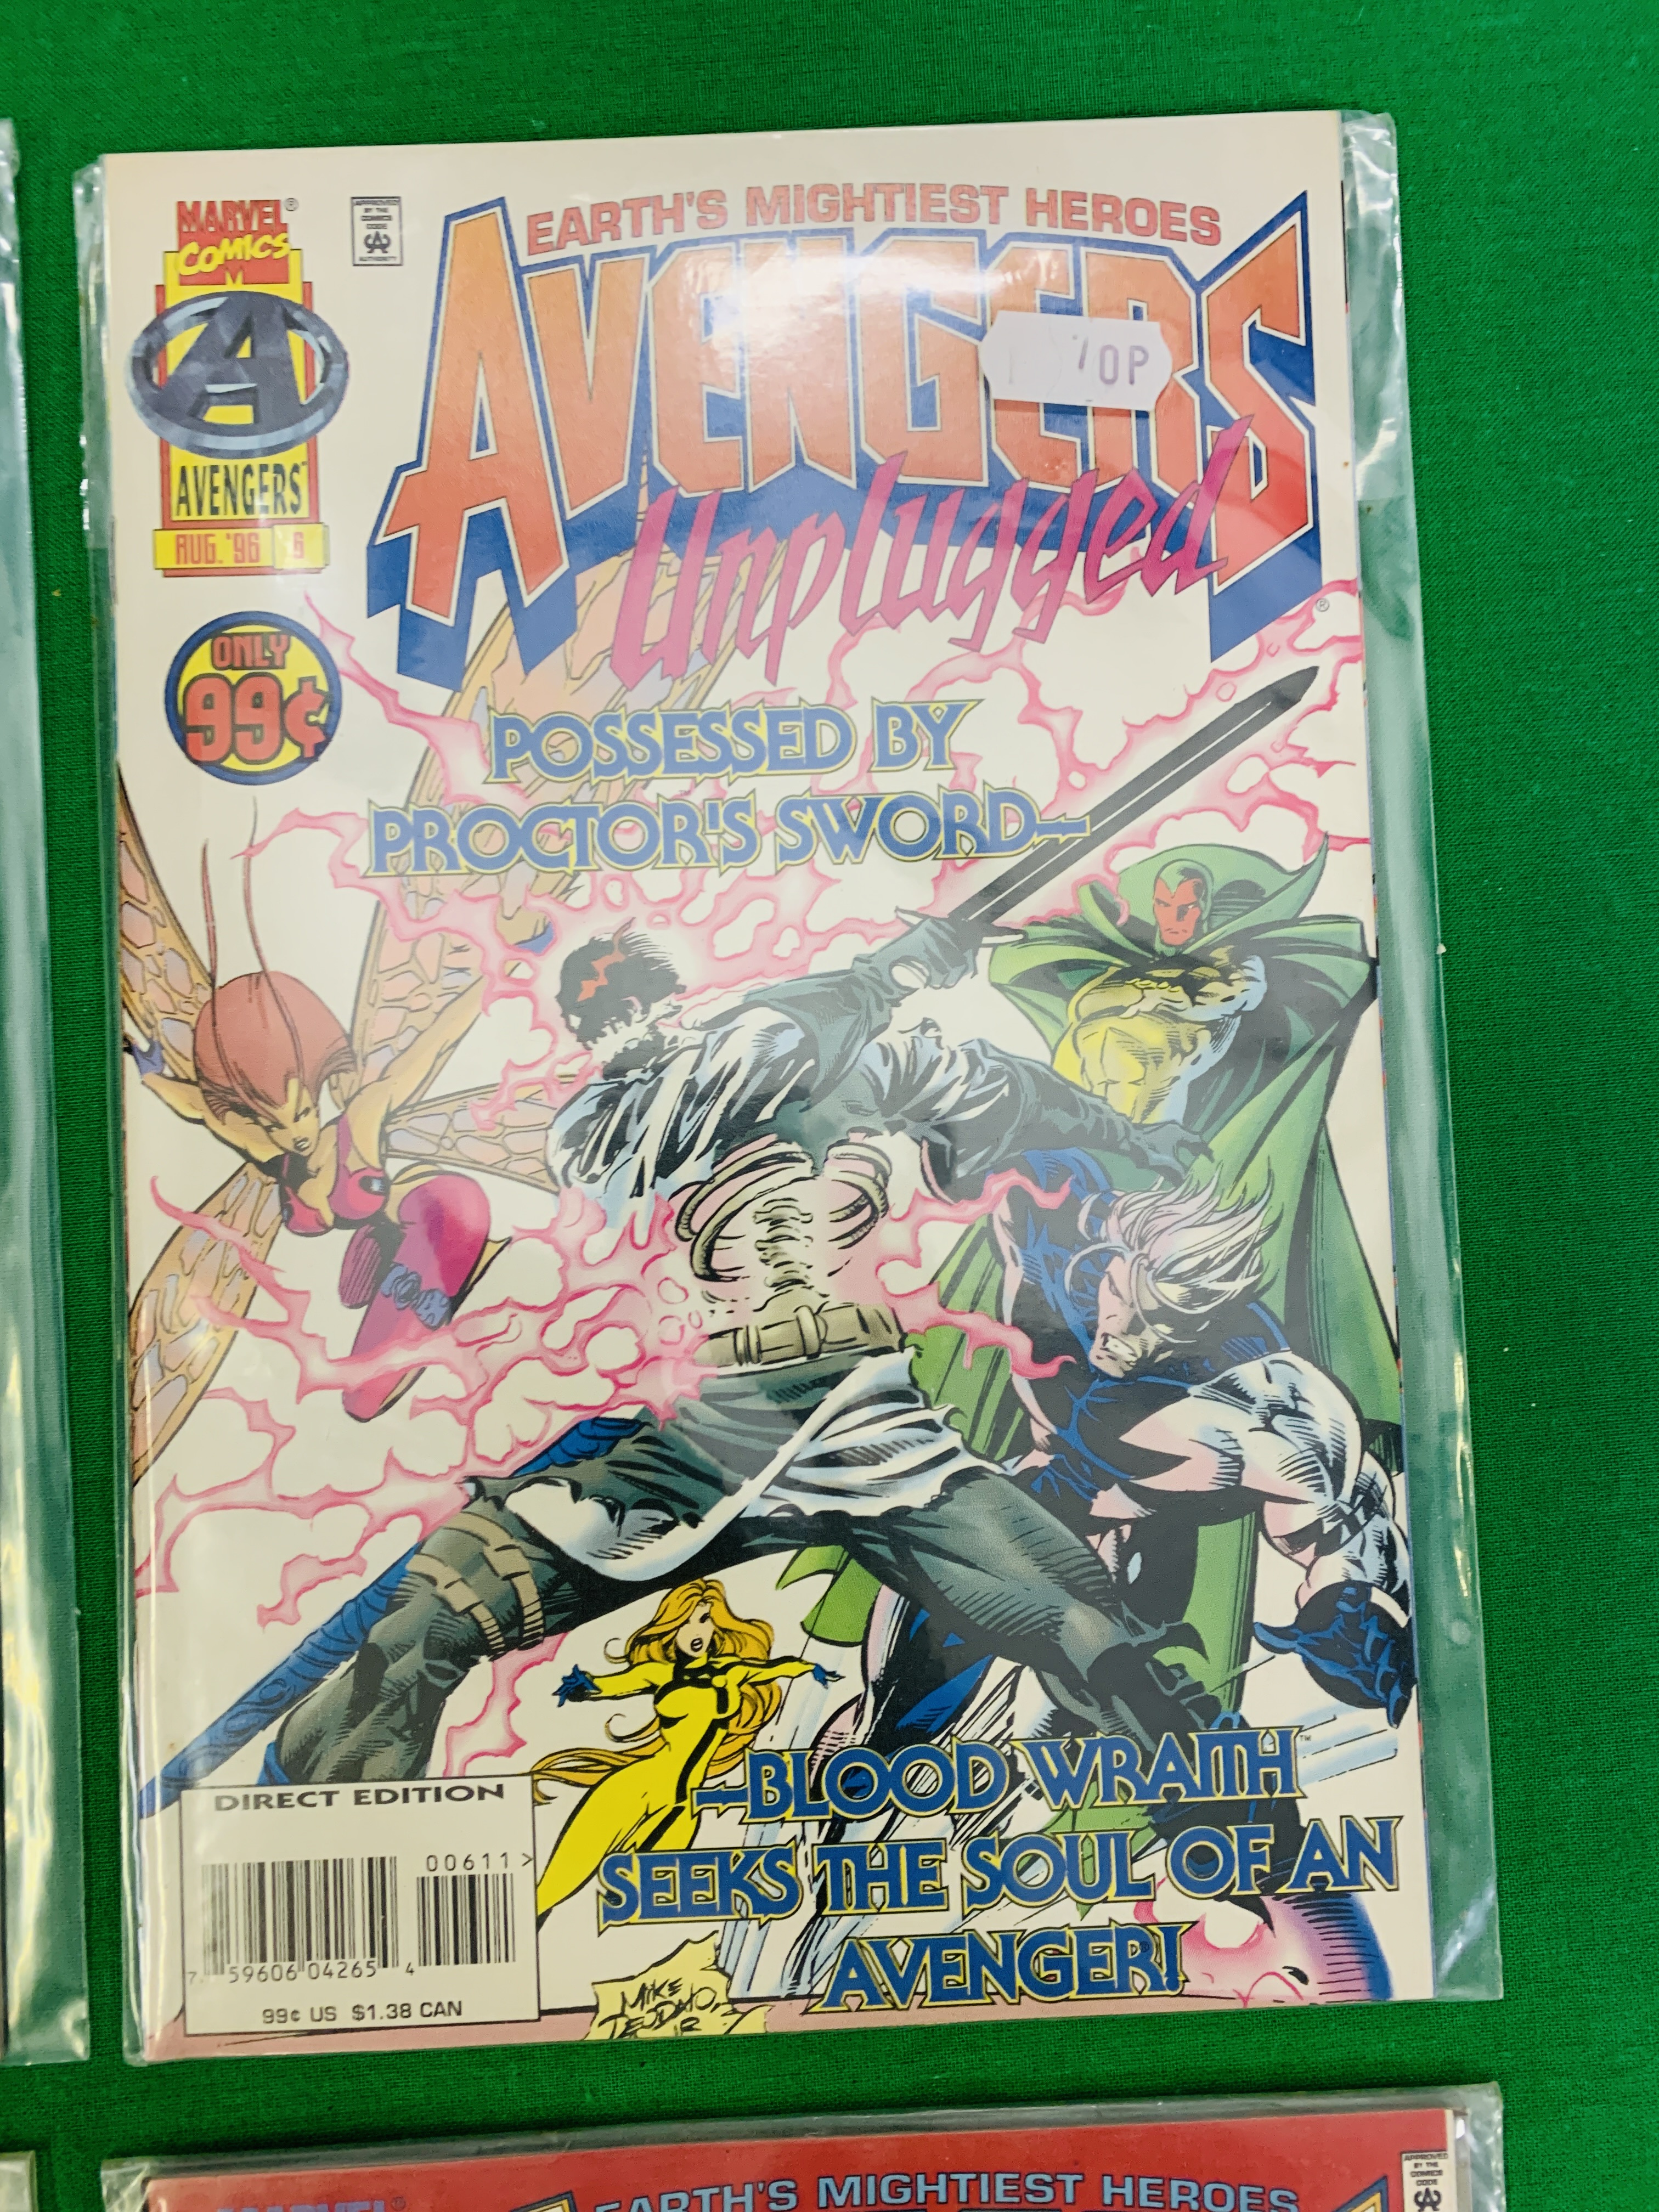 MARVEL COMICS THE AVENGERS UNPLUGGED NO. 1 - 6 FROM 1996, FIRST APPEARANCE NO. 5. MONICA RAMBEAU. - Image 7 of 7